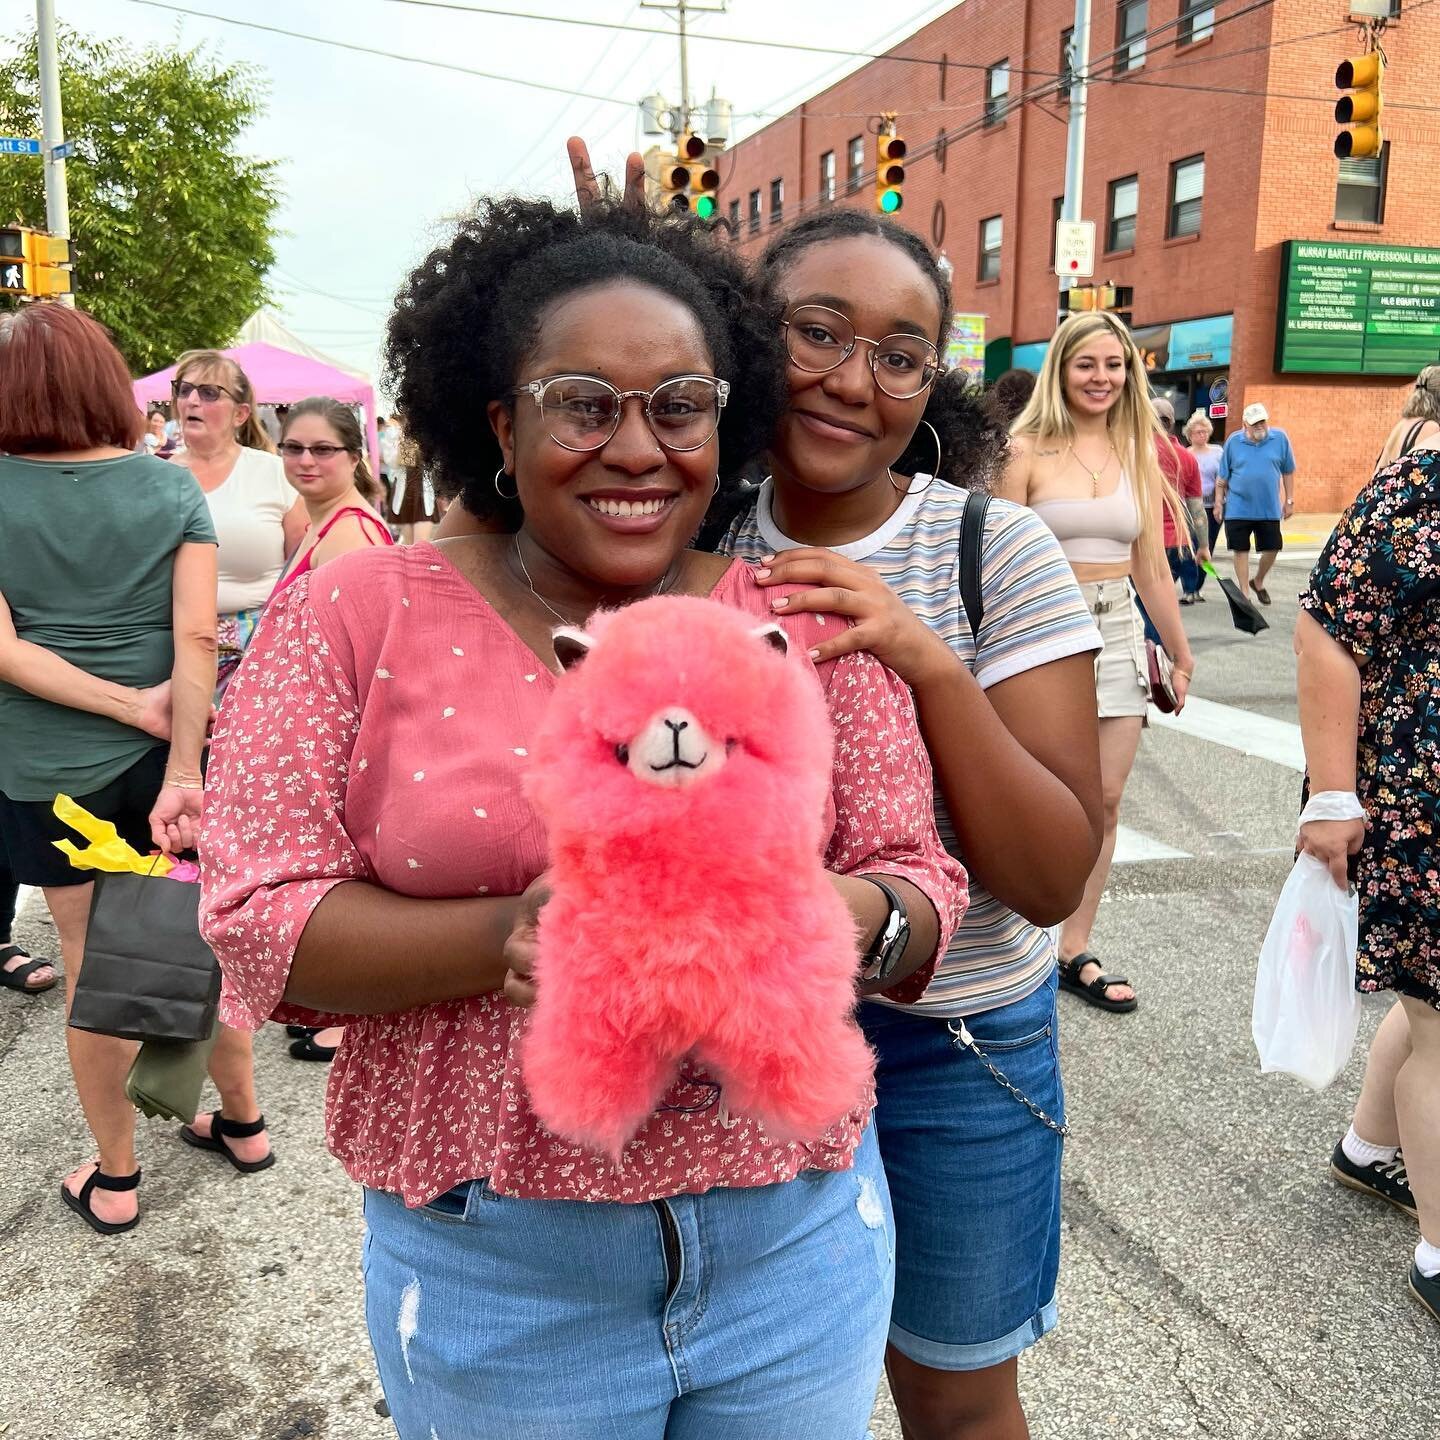 We&rsquo;re counting down the days till this Saturday for the second Squirrel Hill Night Market of the season! The vibes are always *chefs kiss* and the people are stellar 😍 click the link in our bio for a full list of the artists &amp; sellers comi